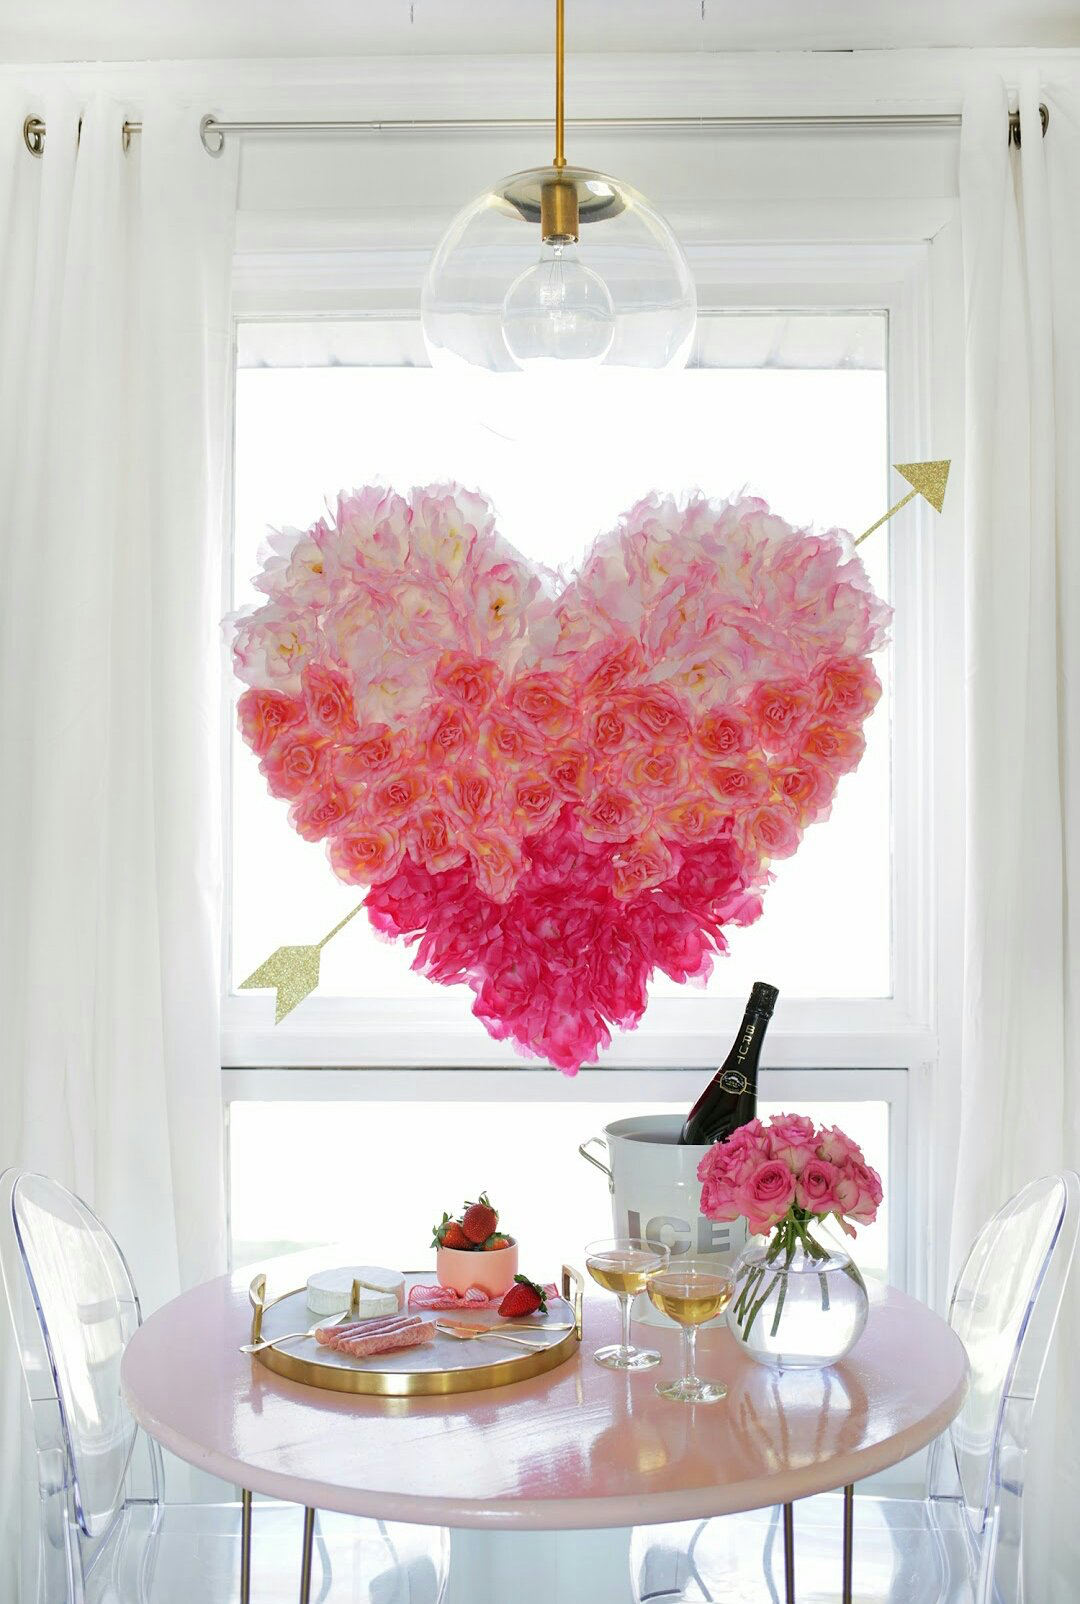 Plan the Perfect Valentine's Day Dinner W/ These Fancy Table Settings